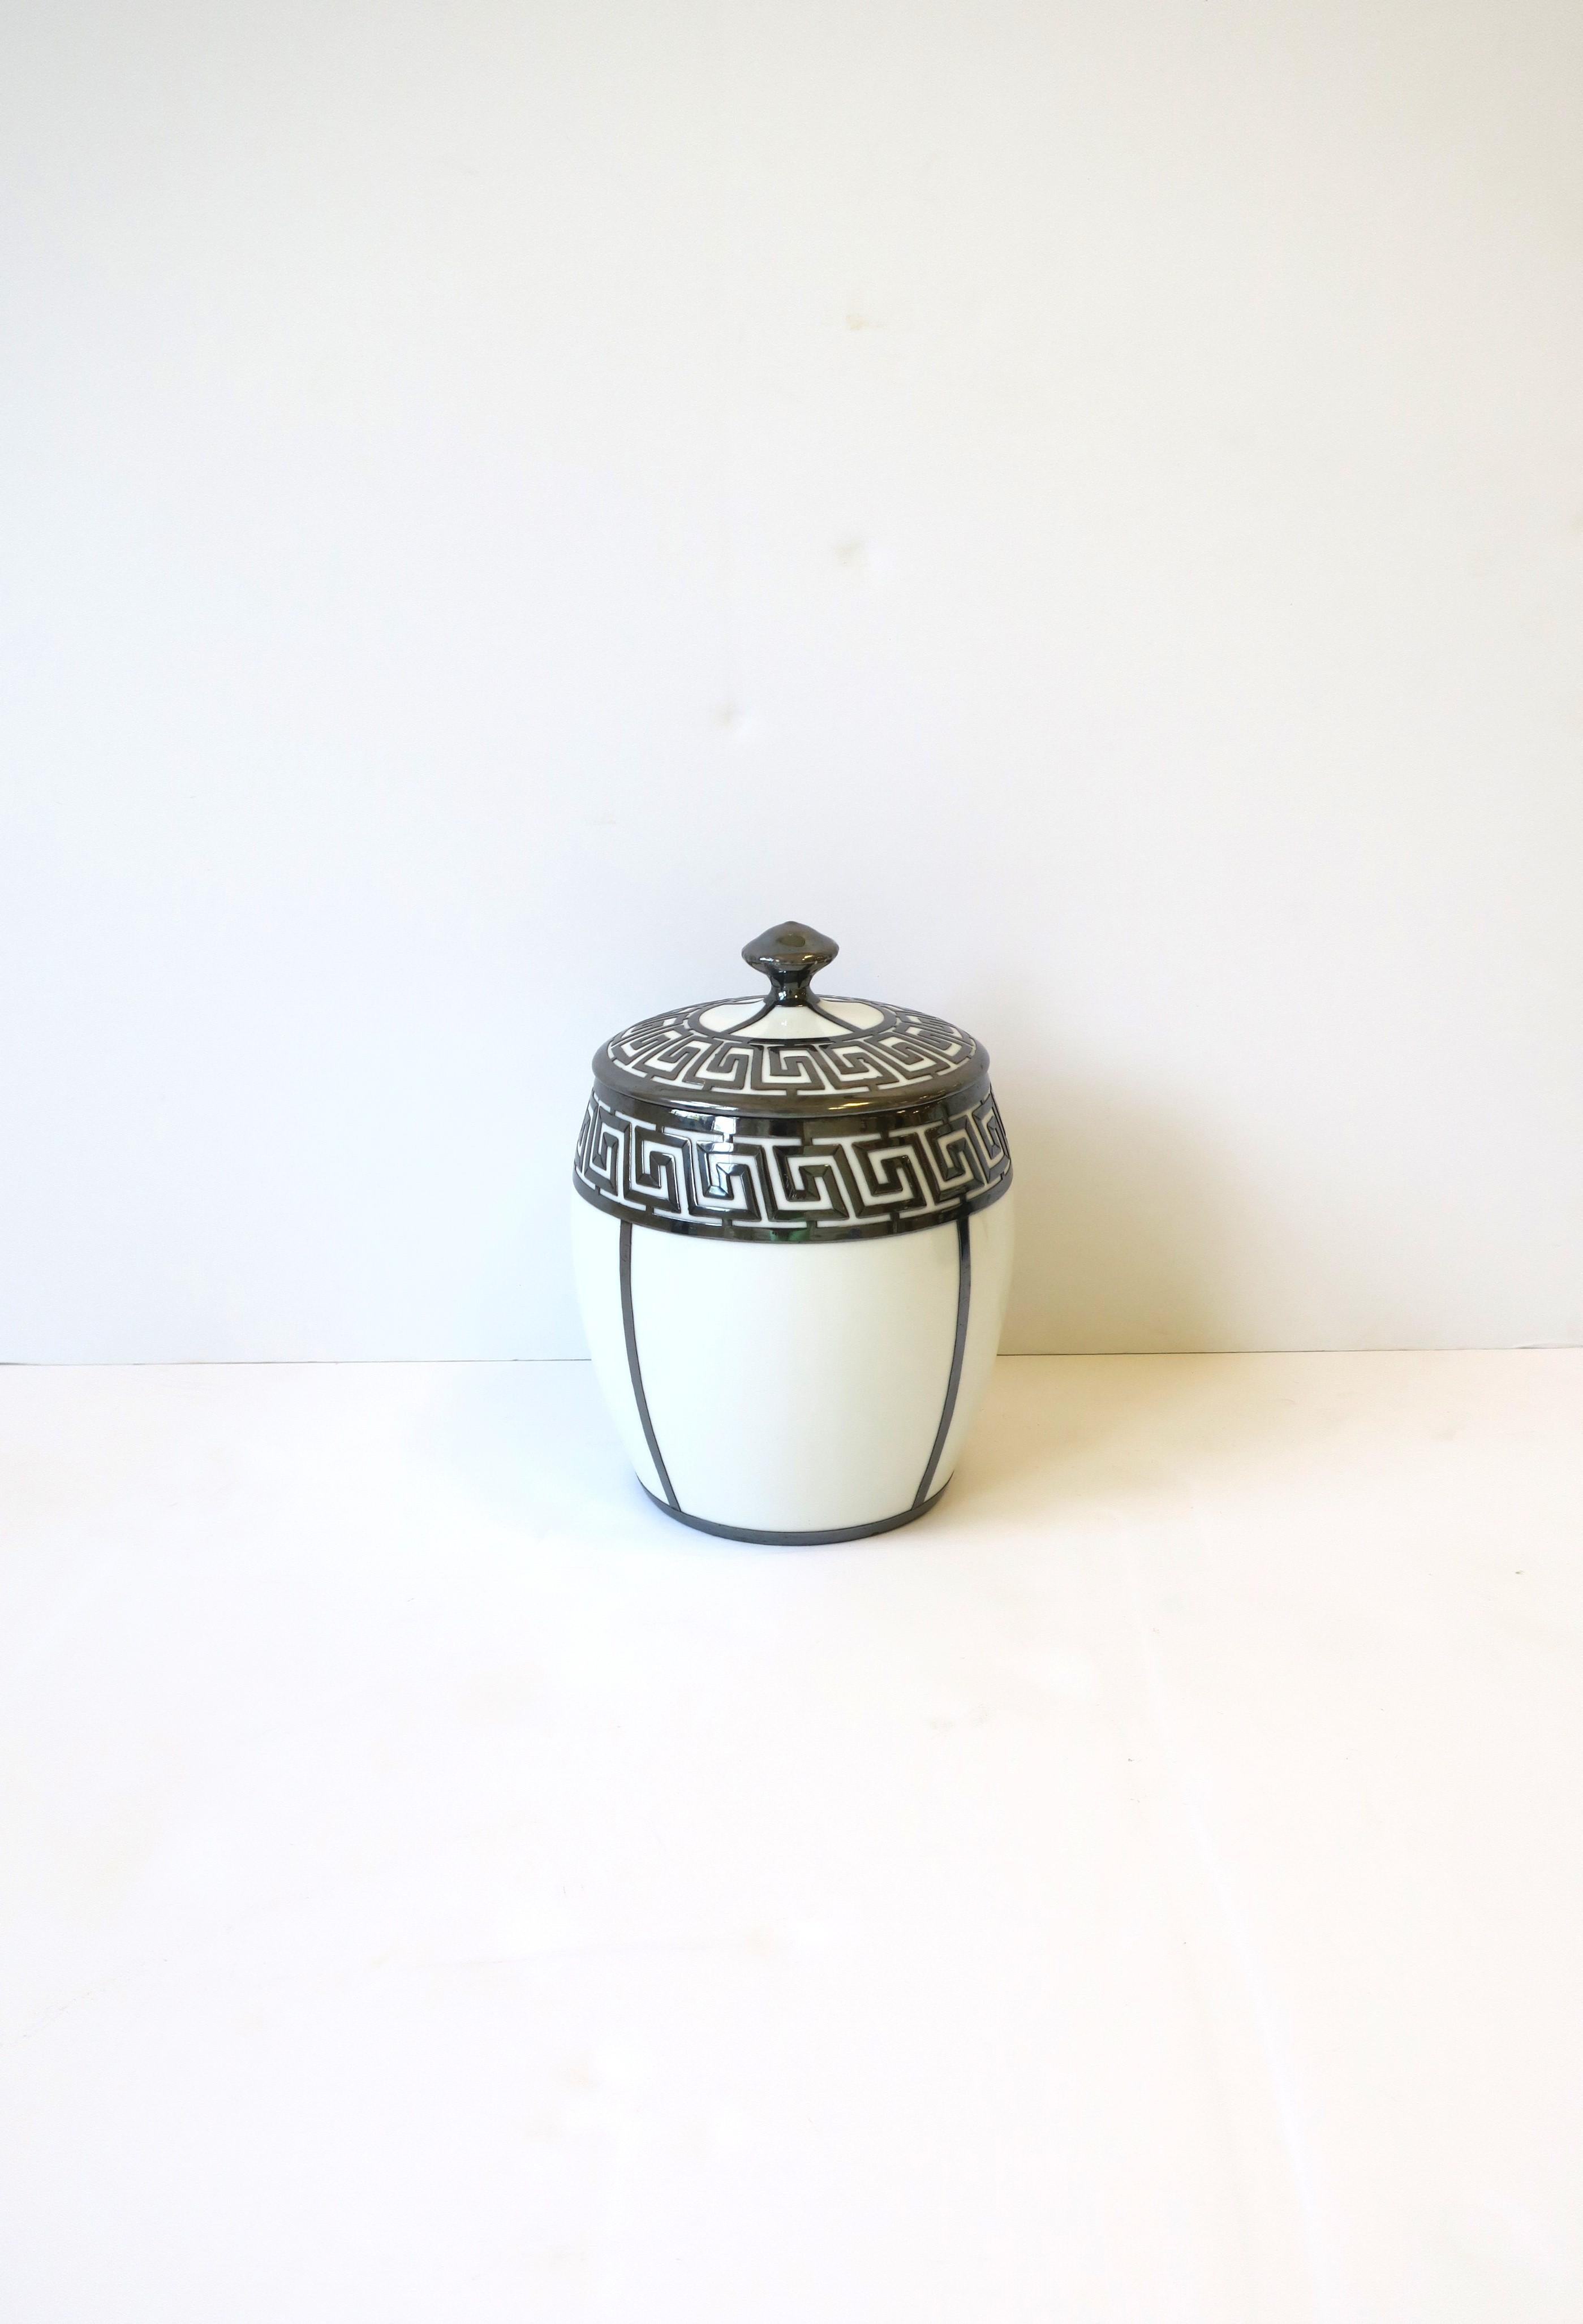 A beautiful French white and silver ice bucket with Greek-Key design, by Tressemann & Vogt, circa early to mid-20th century, France. Piece was made expressly for R. H. Macy & Co. New York, New York, as marked on bottom. R.H. Macy and Co. was founded